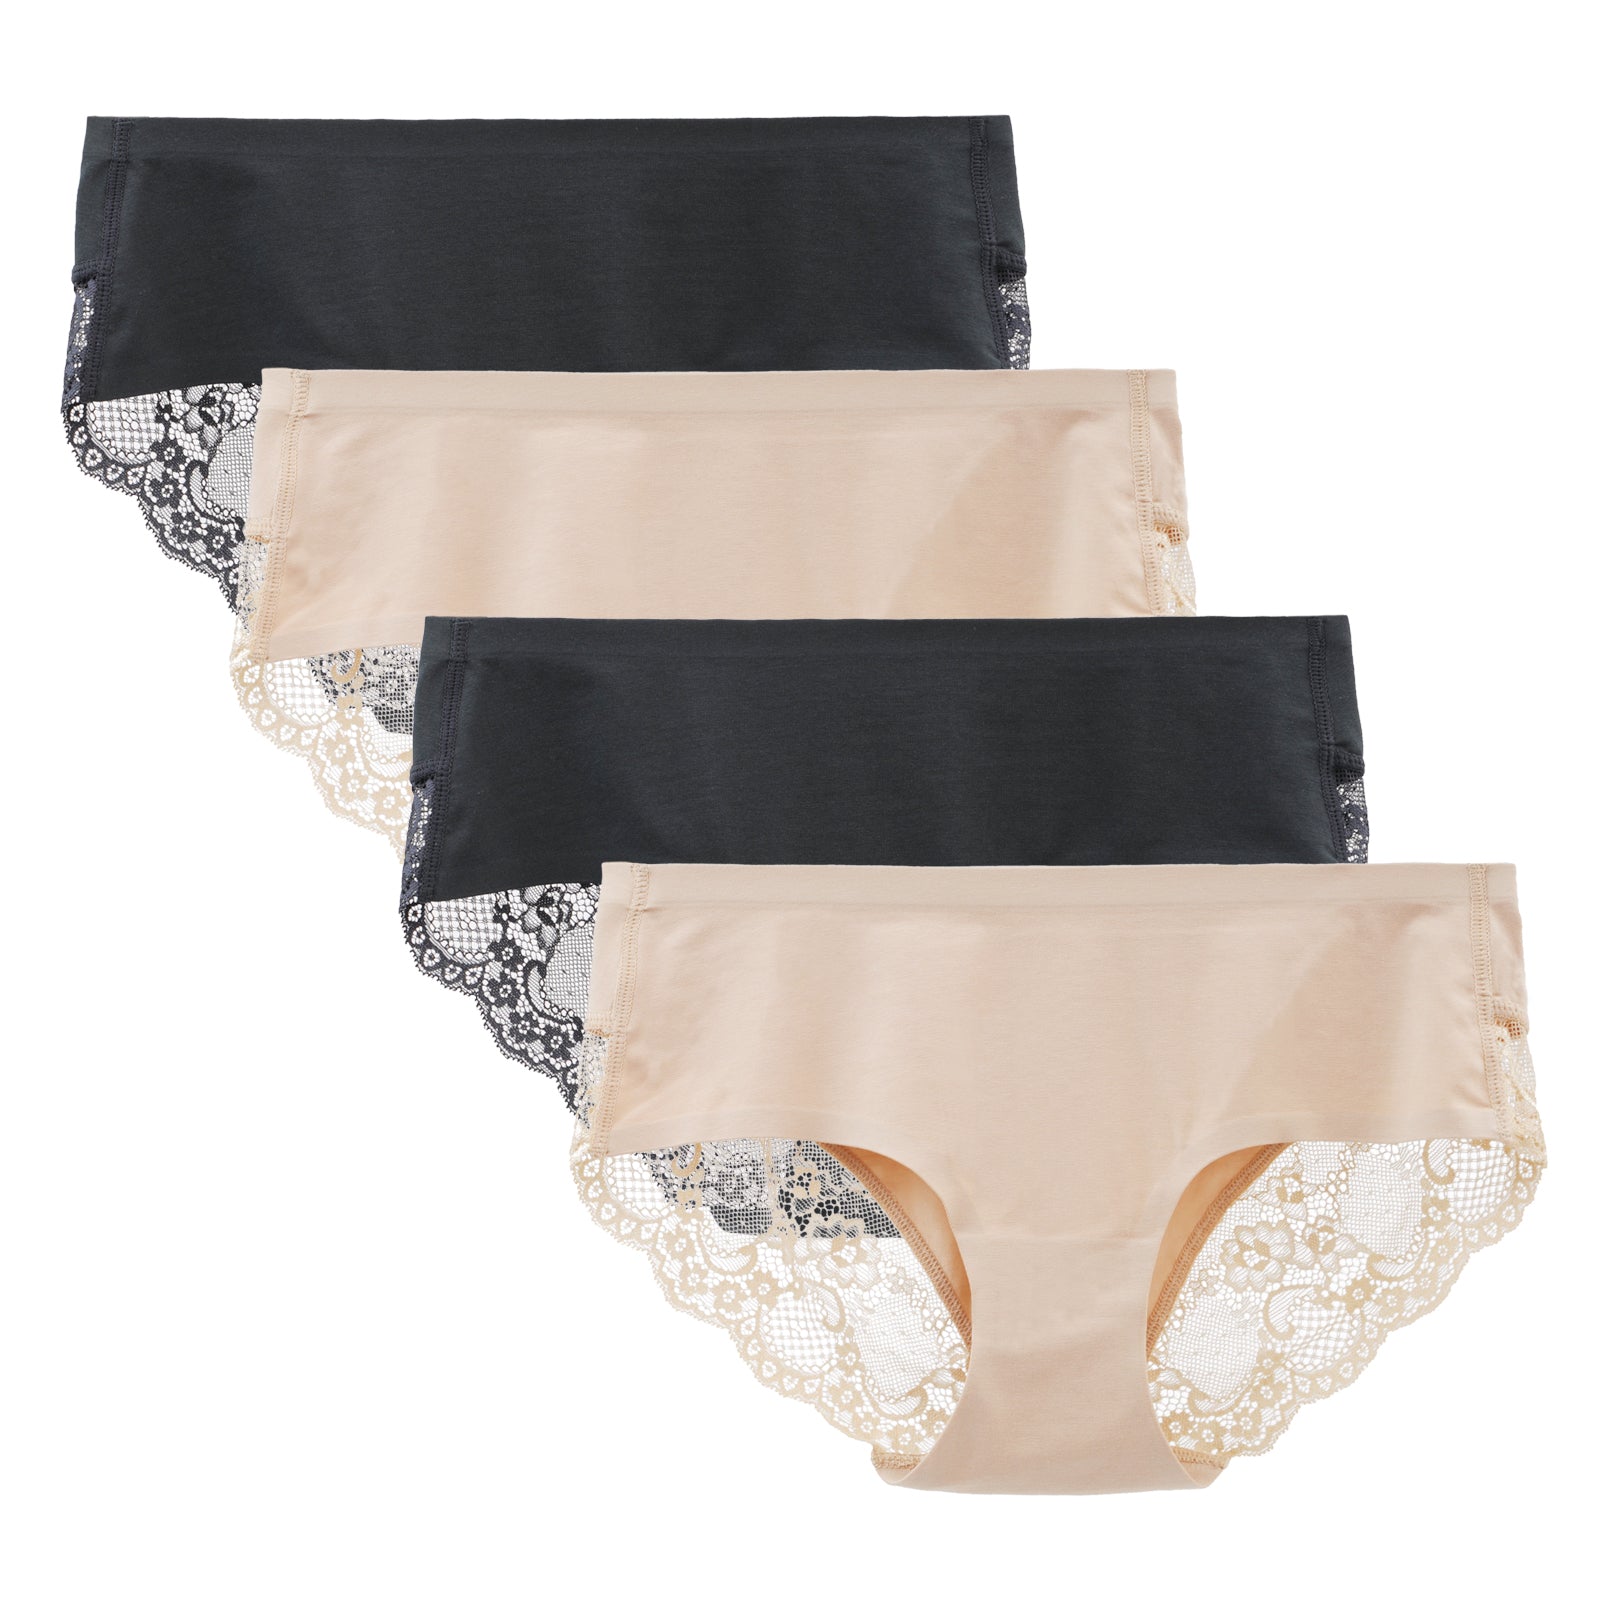 LIQQY Women's 4 Pack Cotton Lace Coverage Seamless Brief Hipster Panty